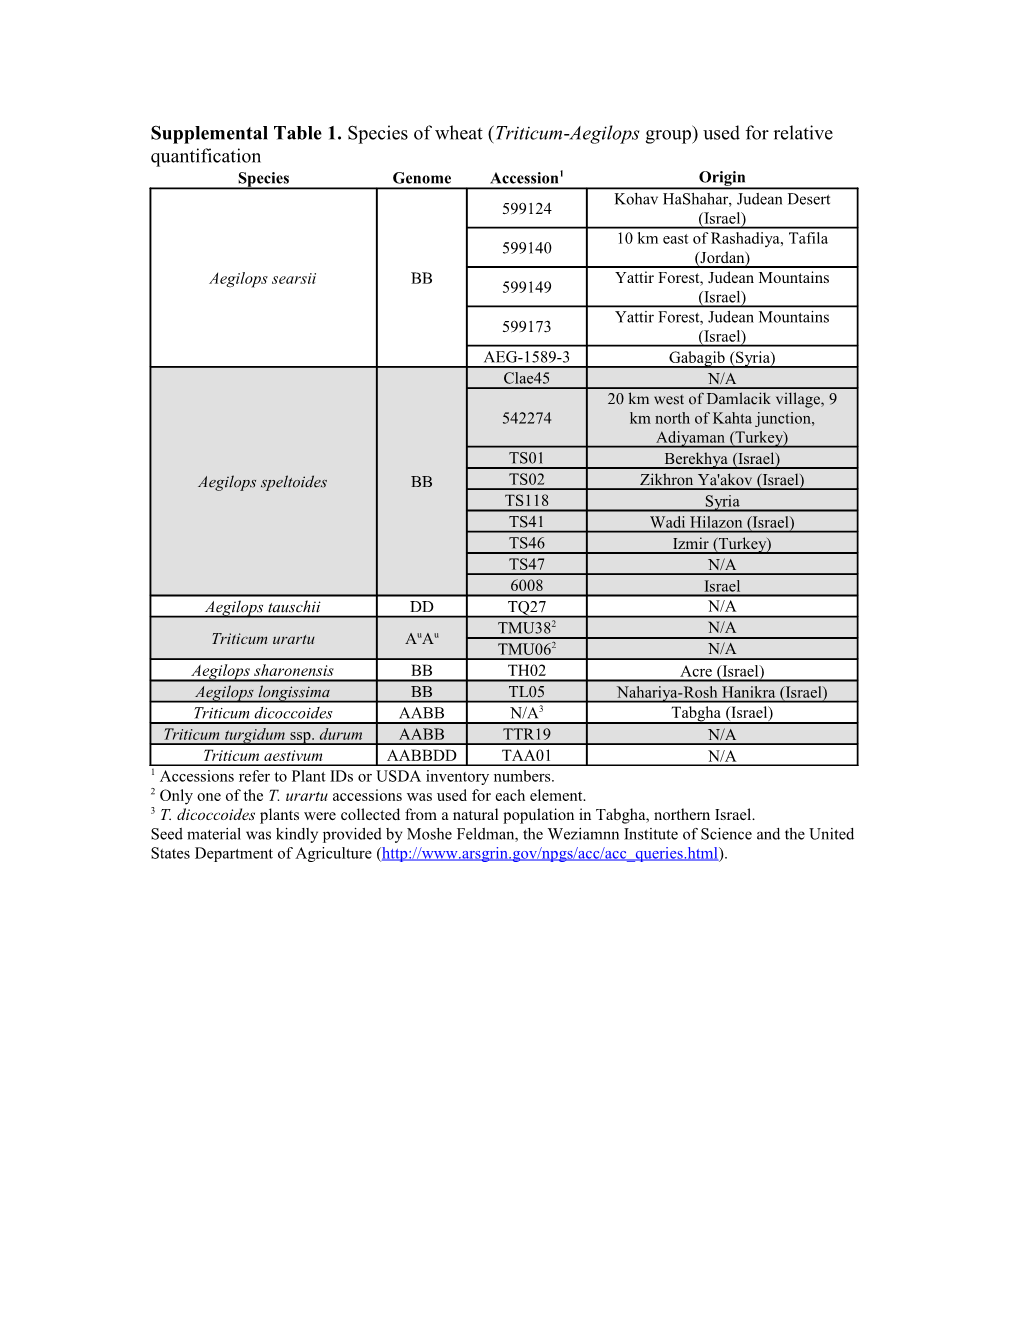 Table S1 List of All Transposable Elements Analyzed in the Study, Their Qpcr Primer Sequences